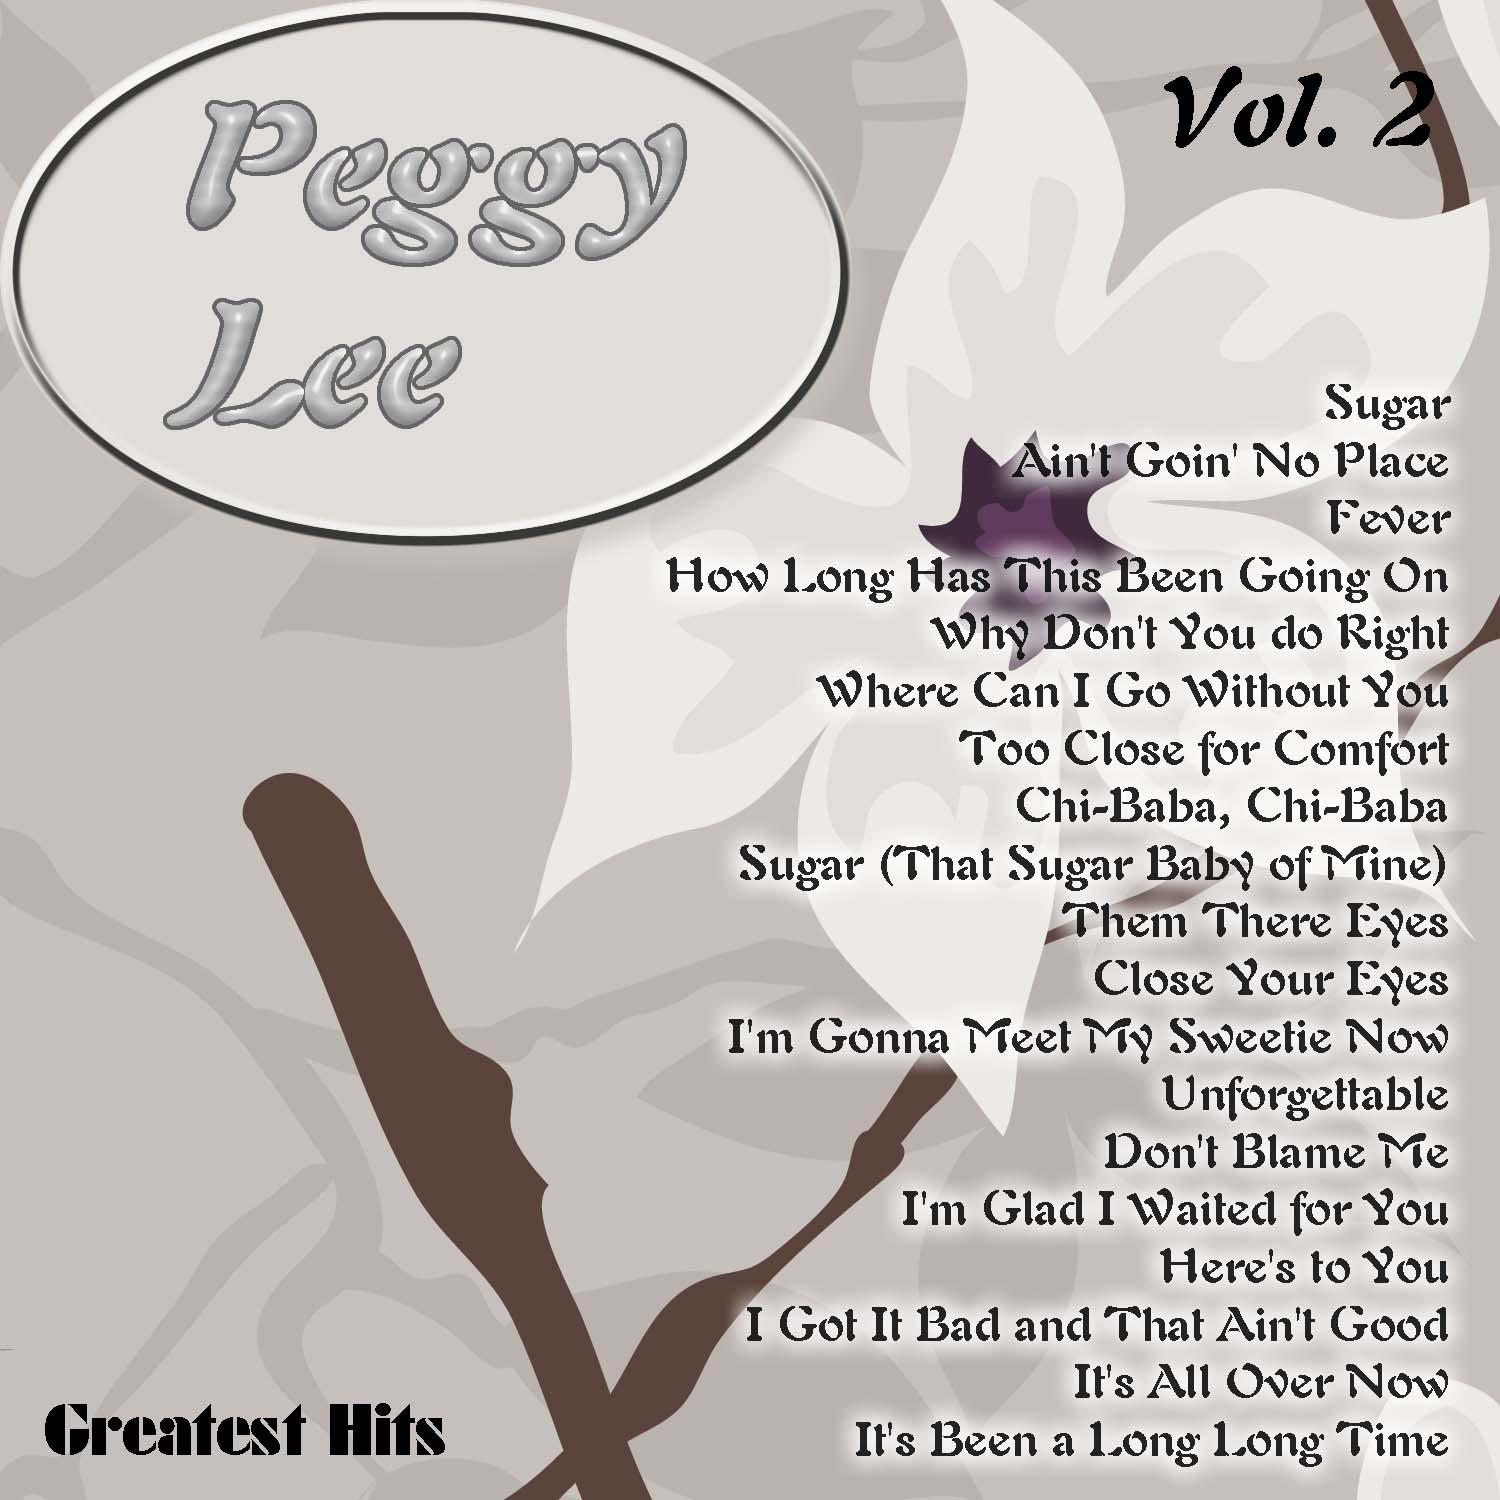 Greatest Hits: Peggy Lee Vol. 2